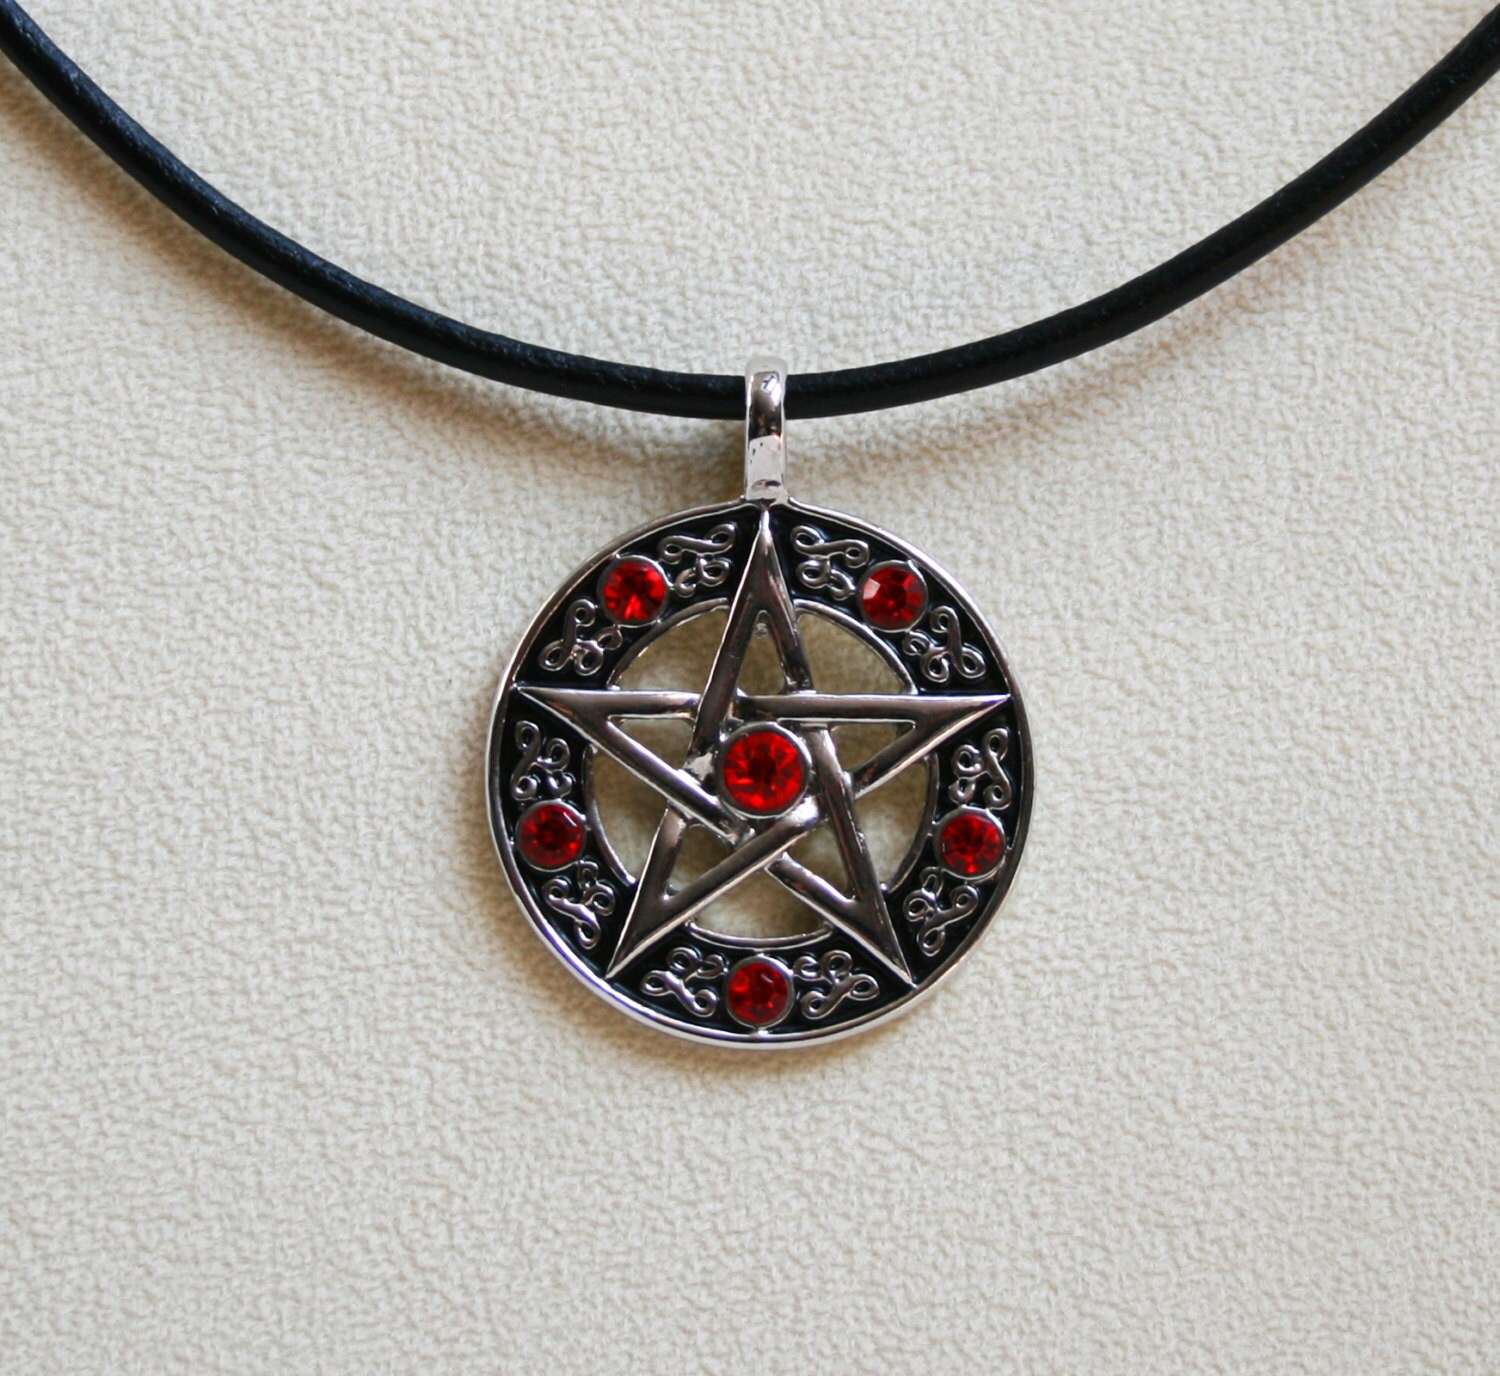 Handcrafted 'pentacle' Pendant Pentagram Set With Sparkling Fiery